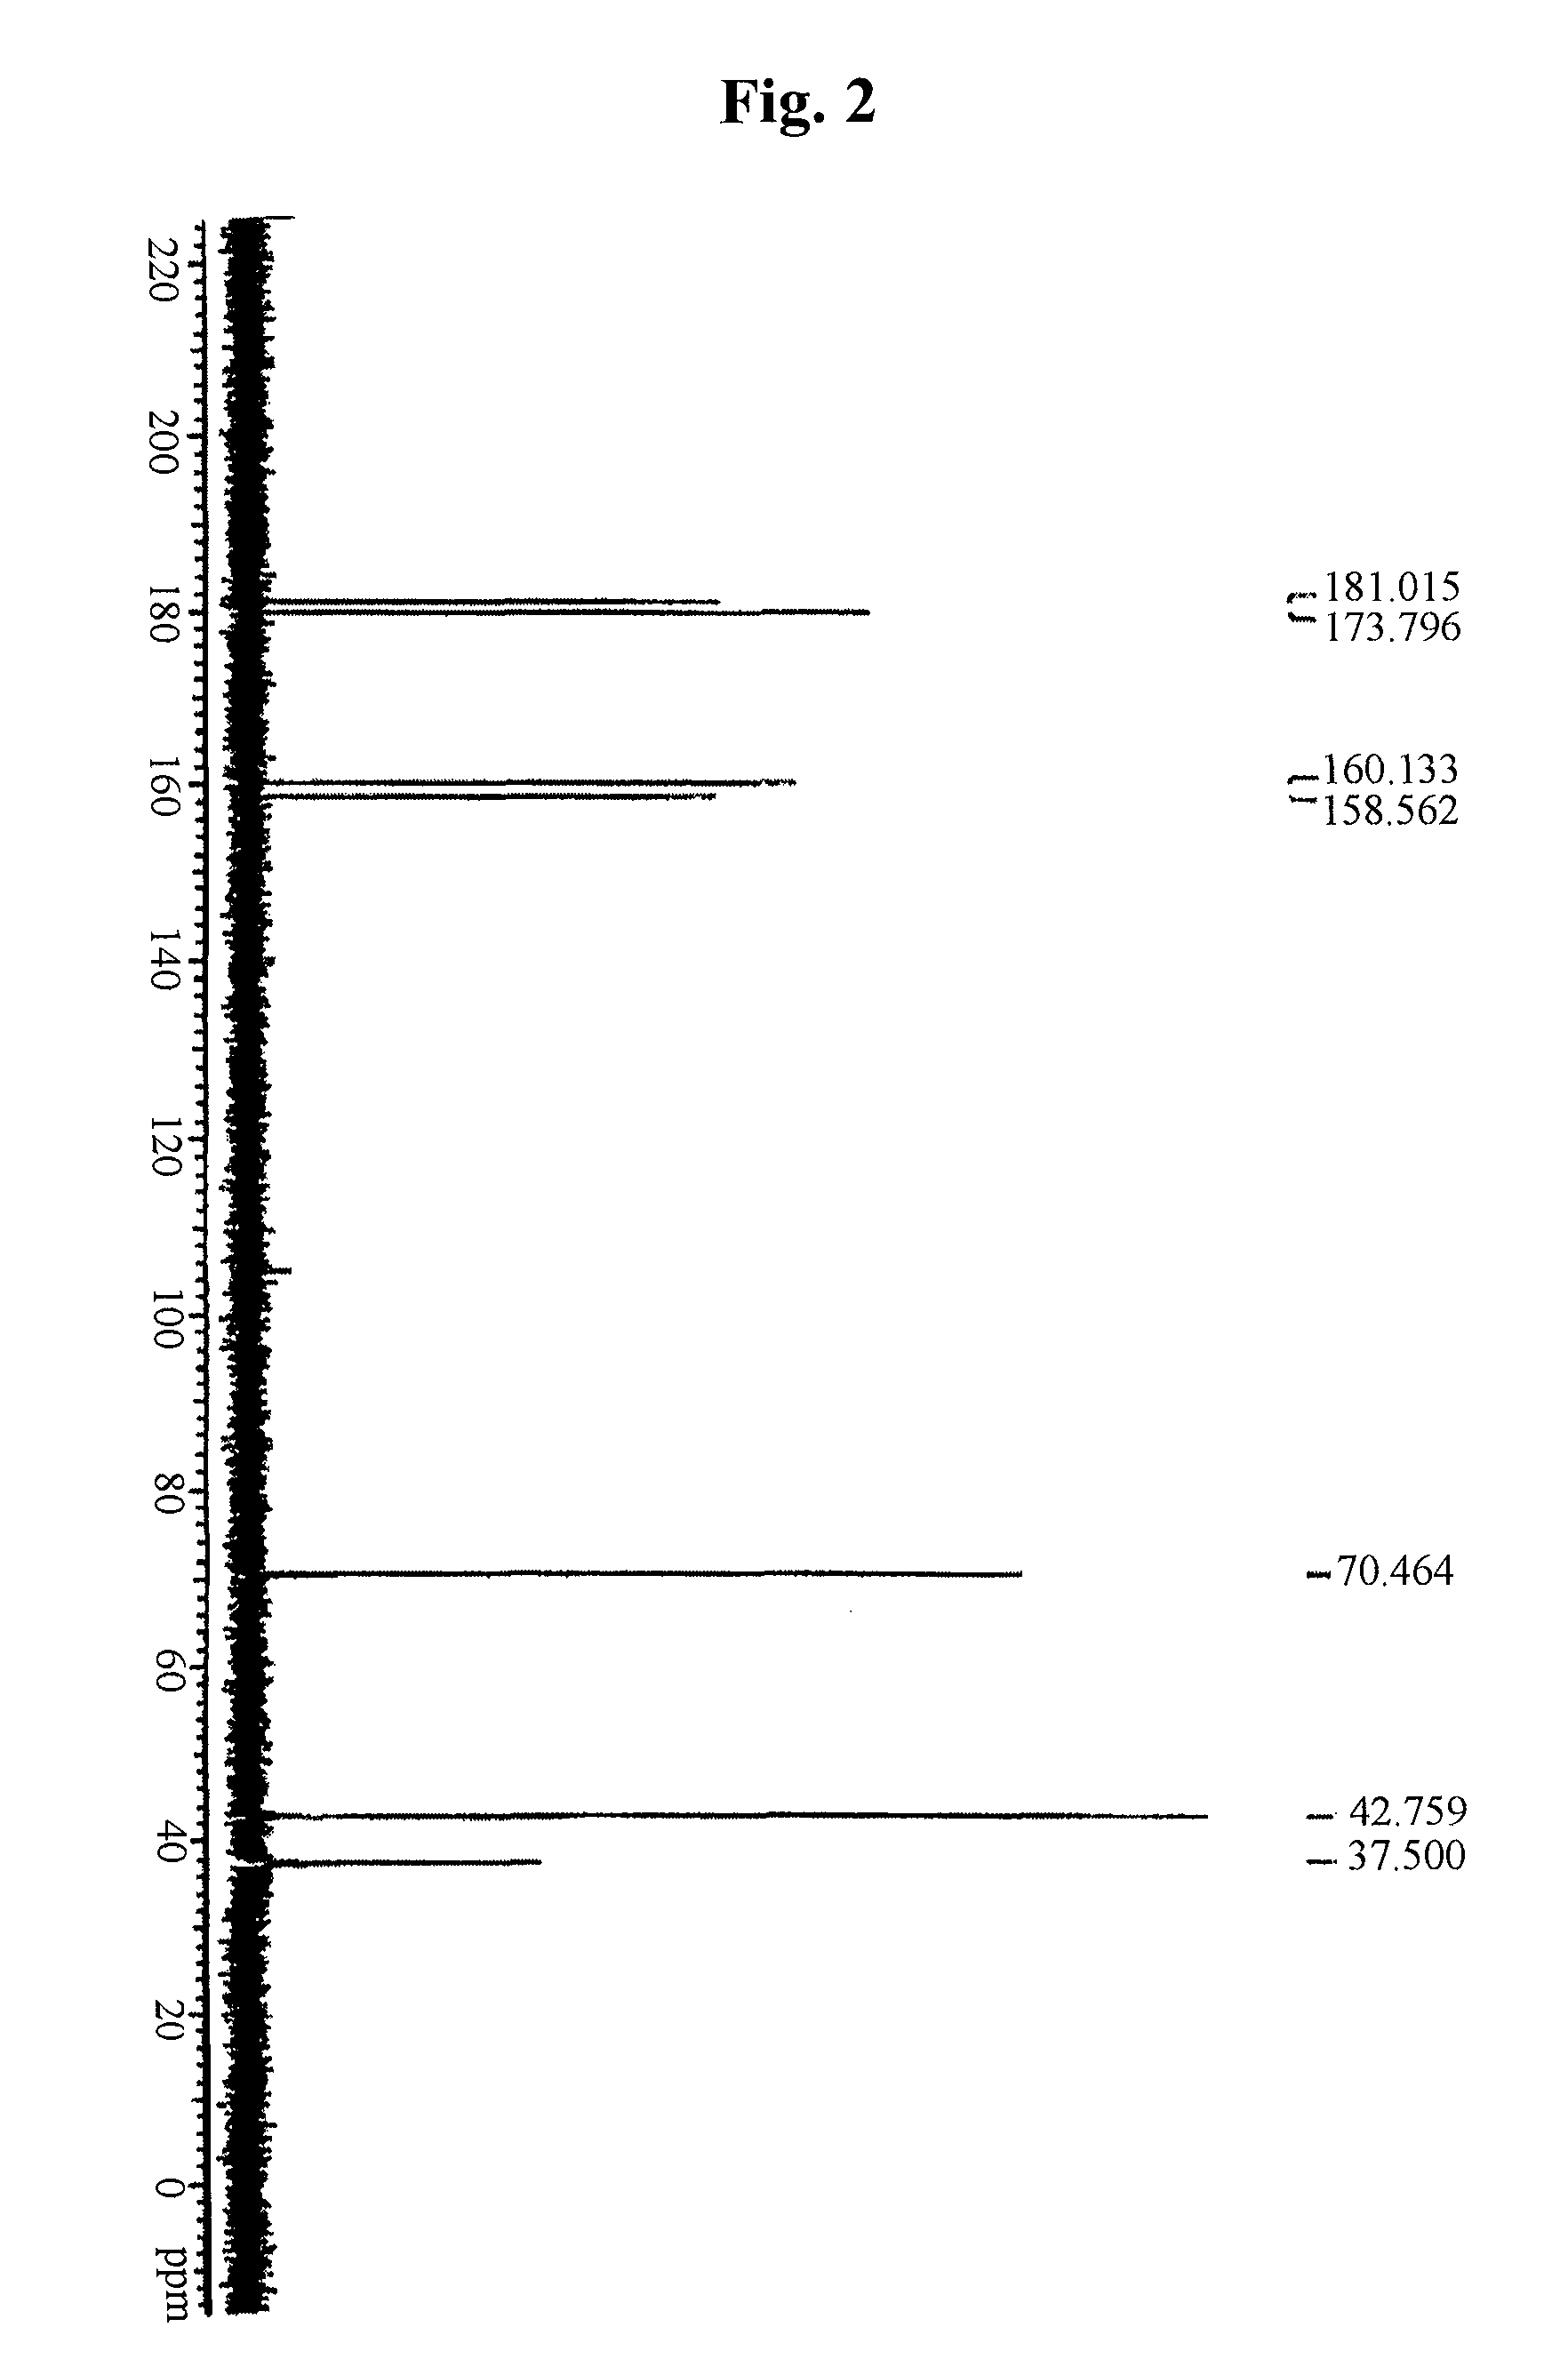 N,N-dimethyl imidodicarbonimidic diamide dicarboxylate, method for producing the same and pharmaceutical compositions comprising the same